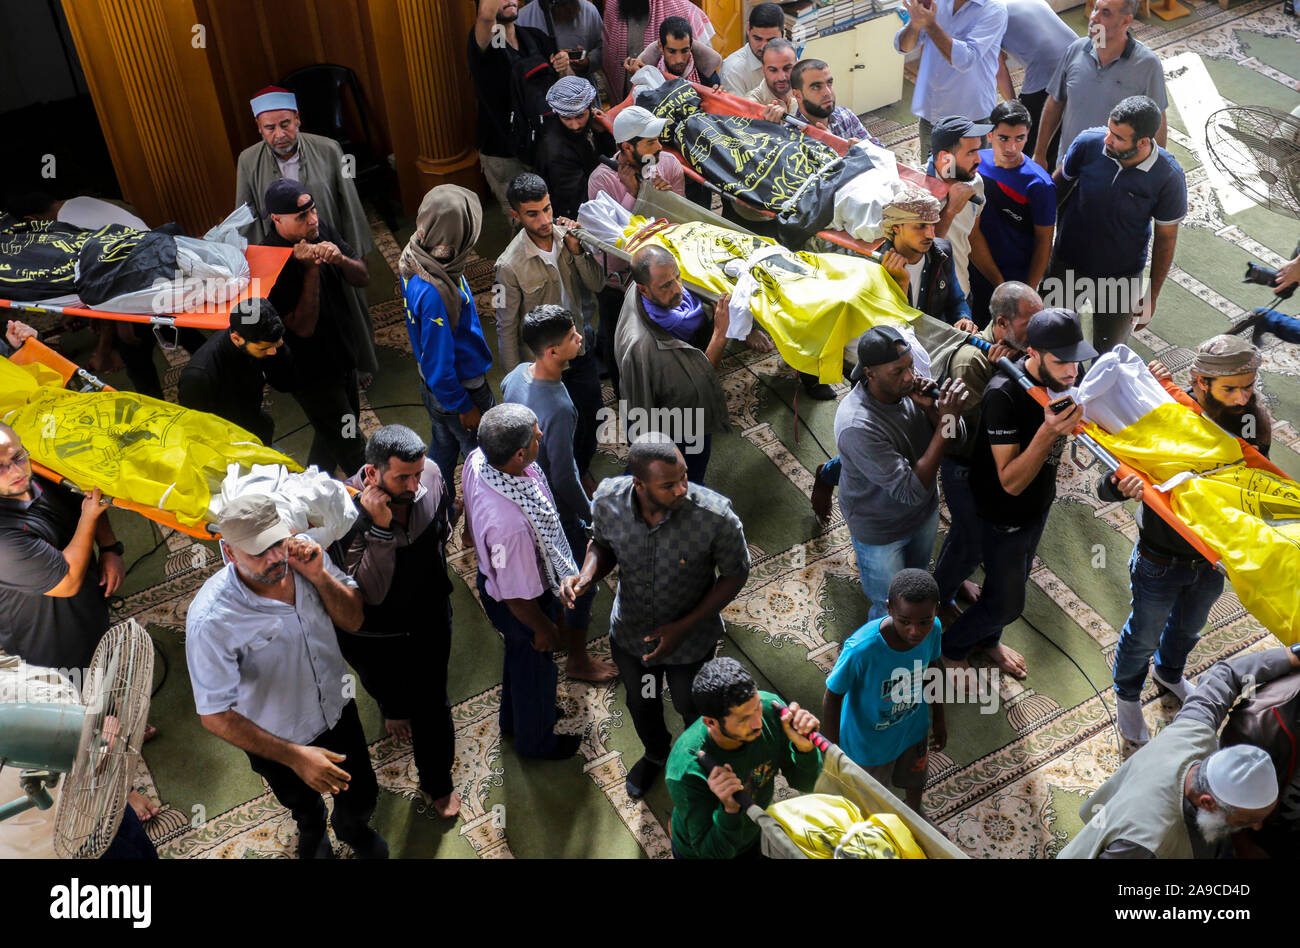 (EDITOR’S NOTE: Image depicts death)Palestinian mourners carry out the bodies of Rasmi Abu Malhous and seven members of his family during their funeral at a mosque in Deir al-Balah, central Gaza Strip. The deceased were killed in an overnight Israeli missile strike that targeted their house. Stock Photo